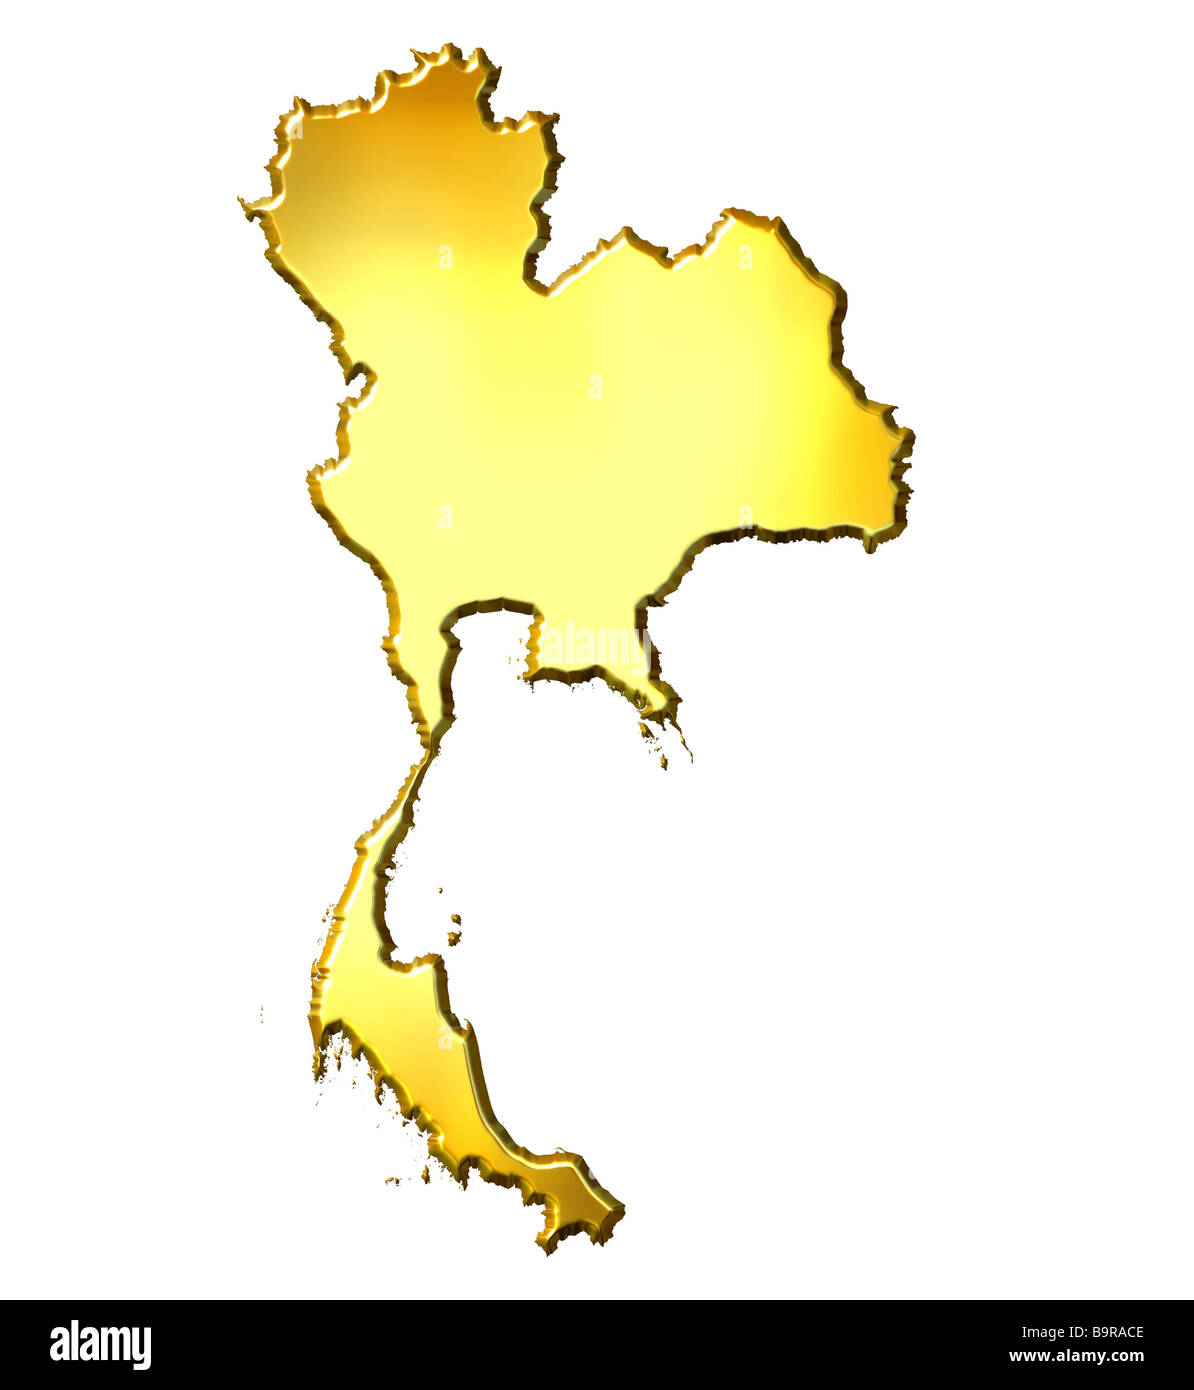 Thailand 3d golden map isolated in white Stock Photo